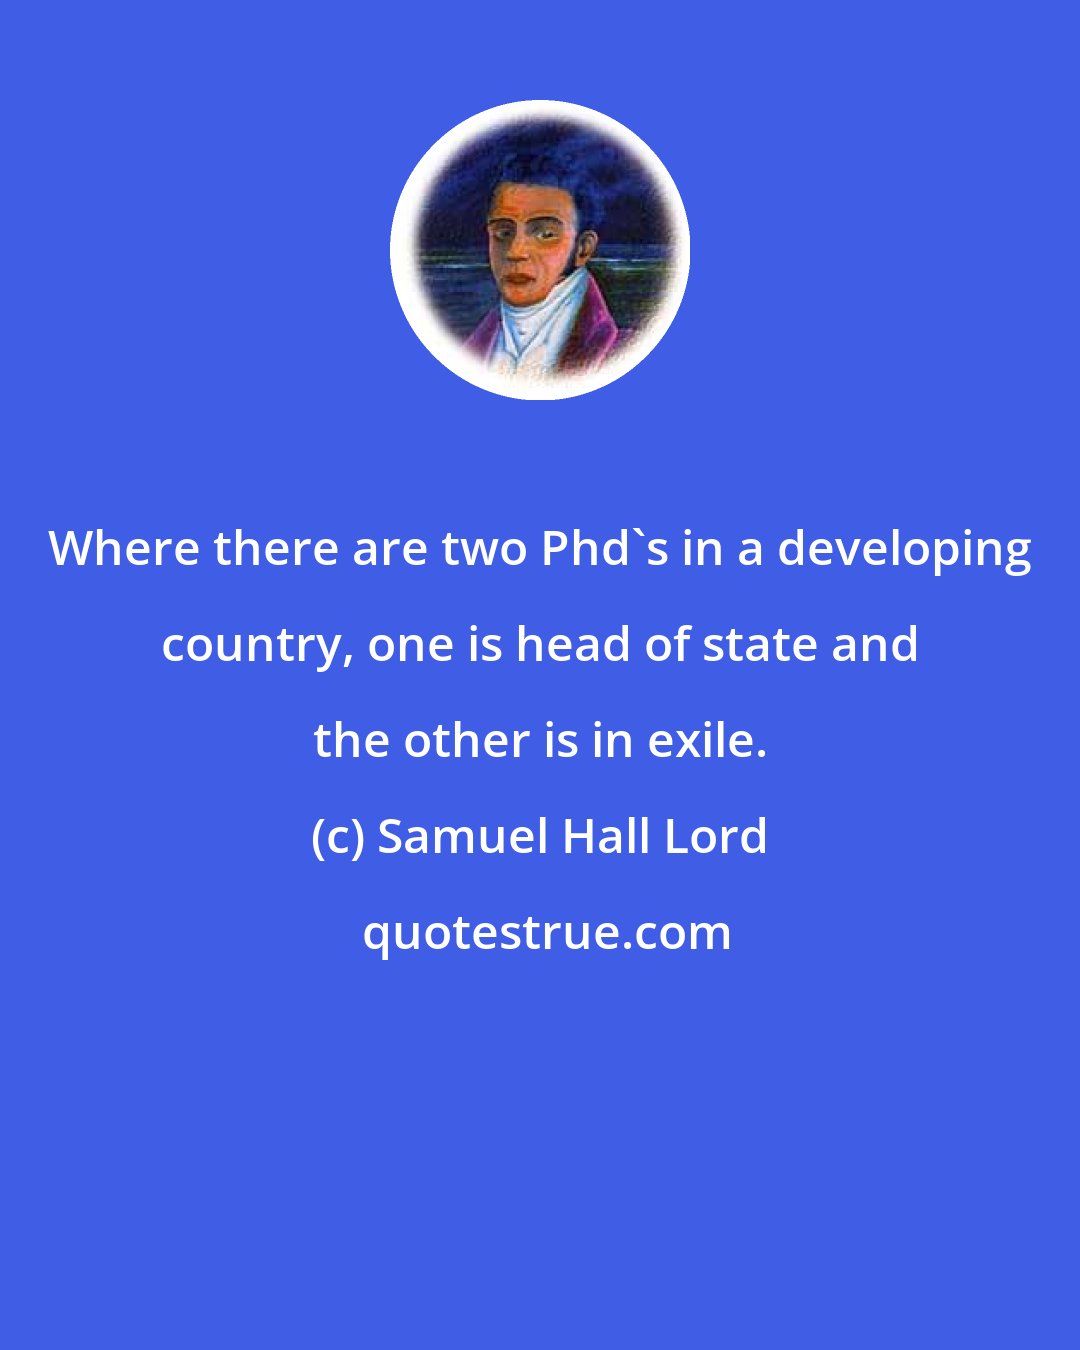 Samuel Hall Lord: Where there are two Phd's in a developing country, one is head of state and the other is in exile.